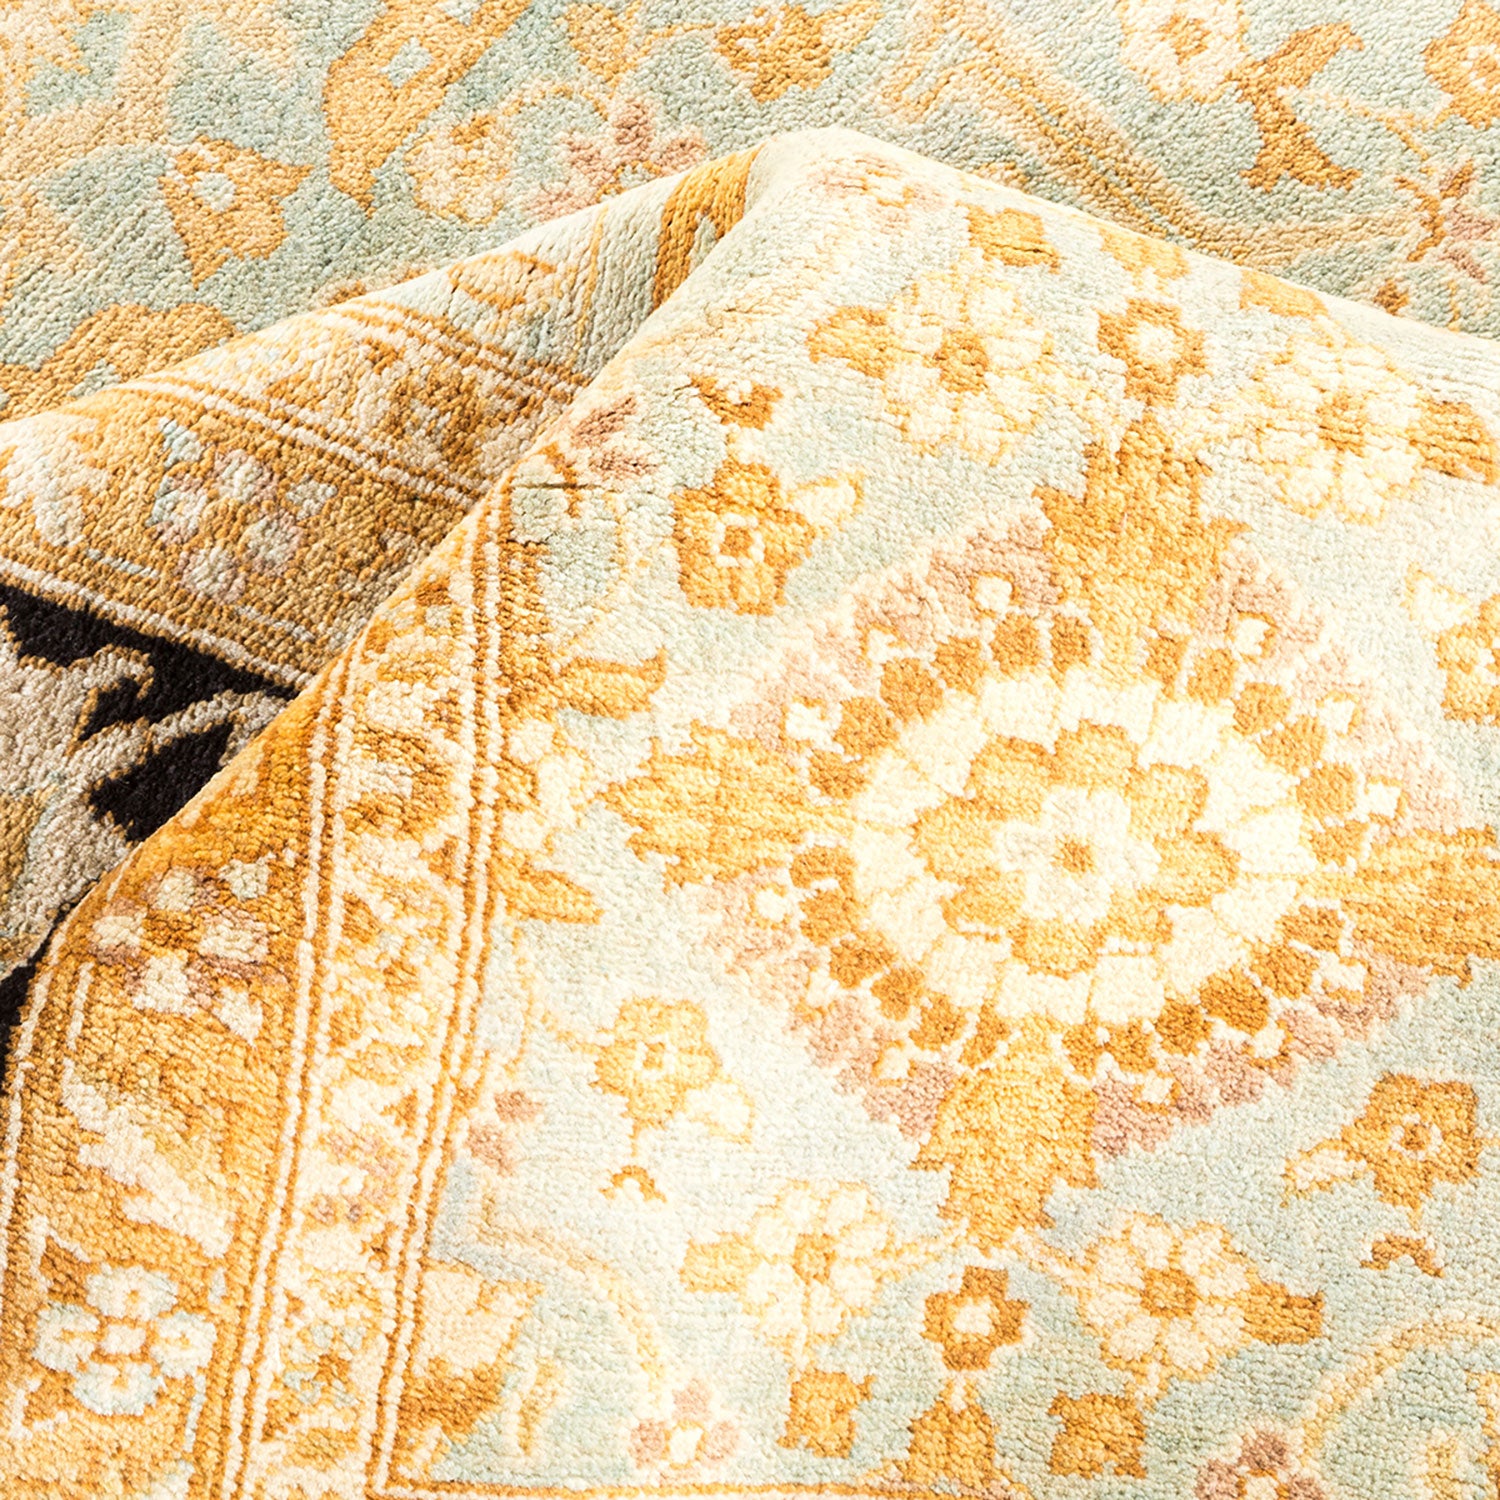 Close-up of intricately patterned, vintage-inspired fabric with warm colors.